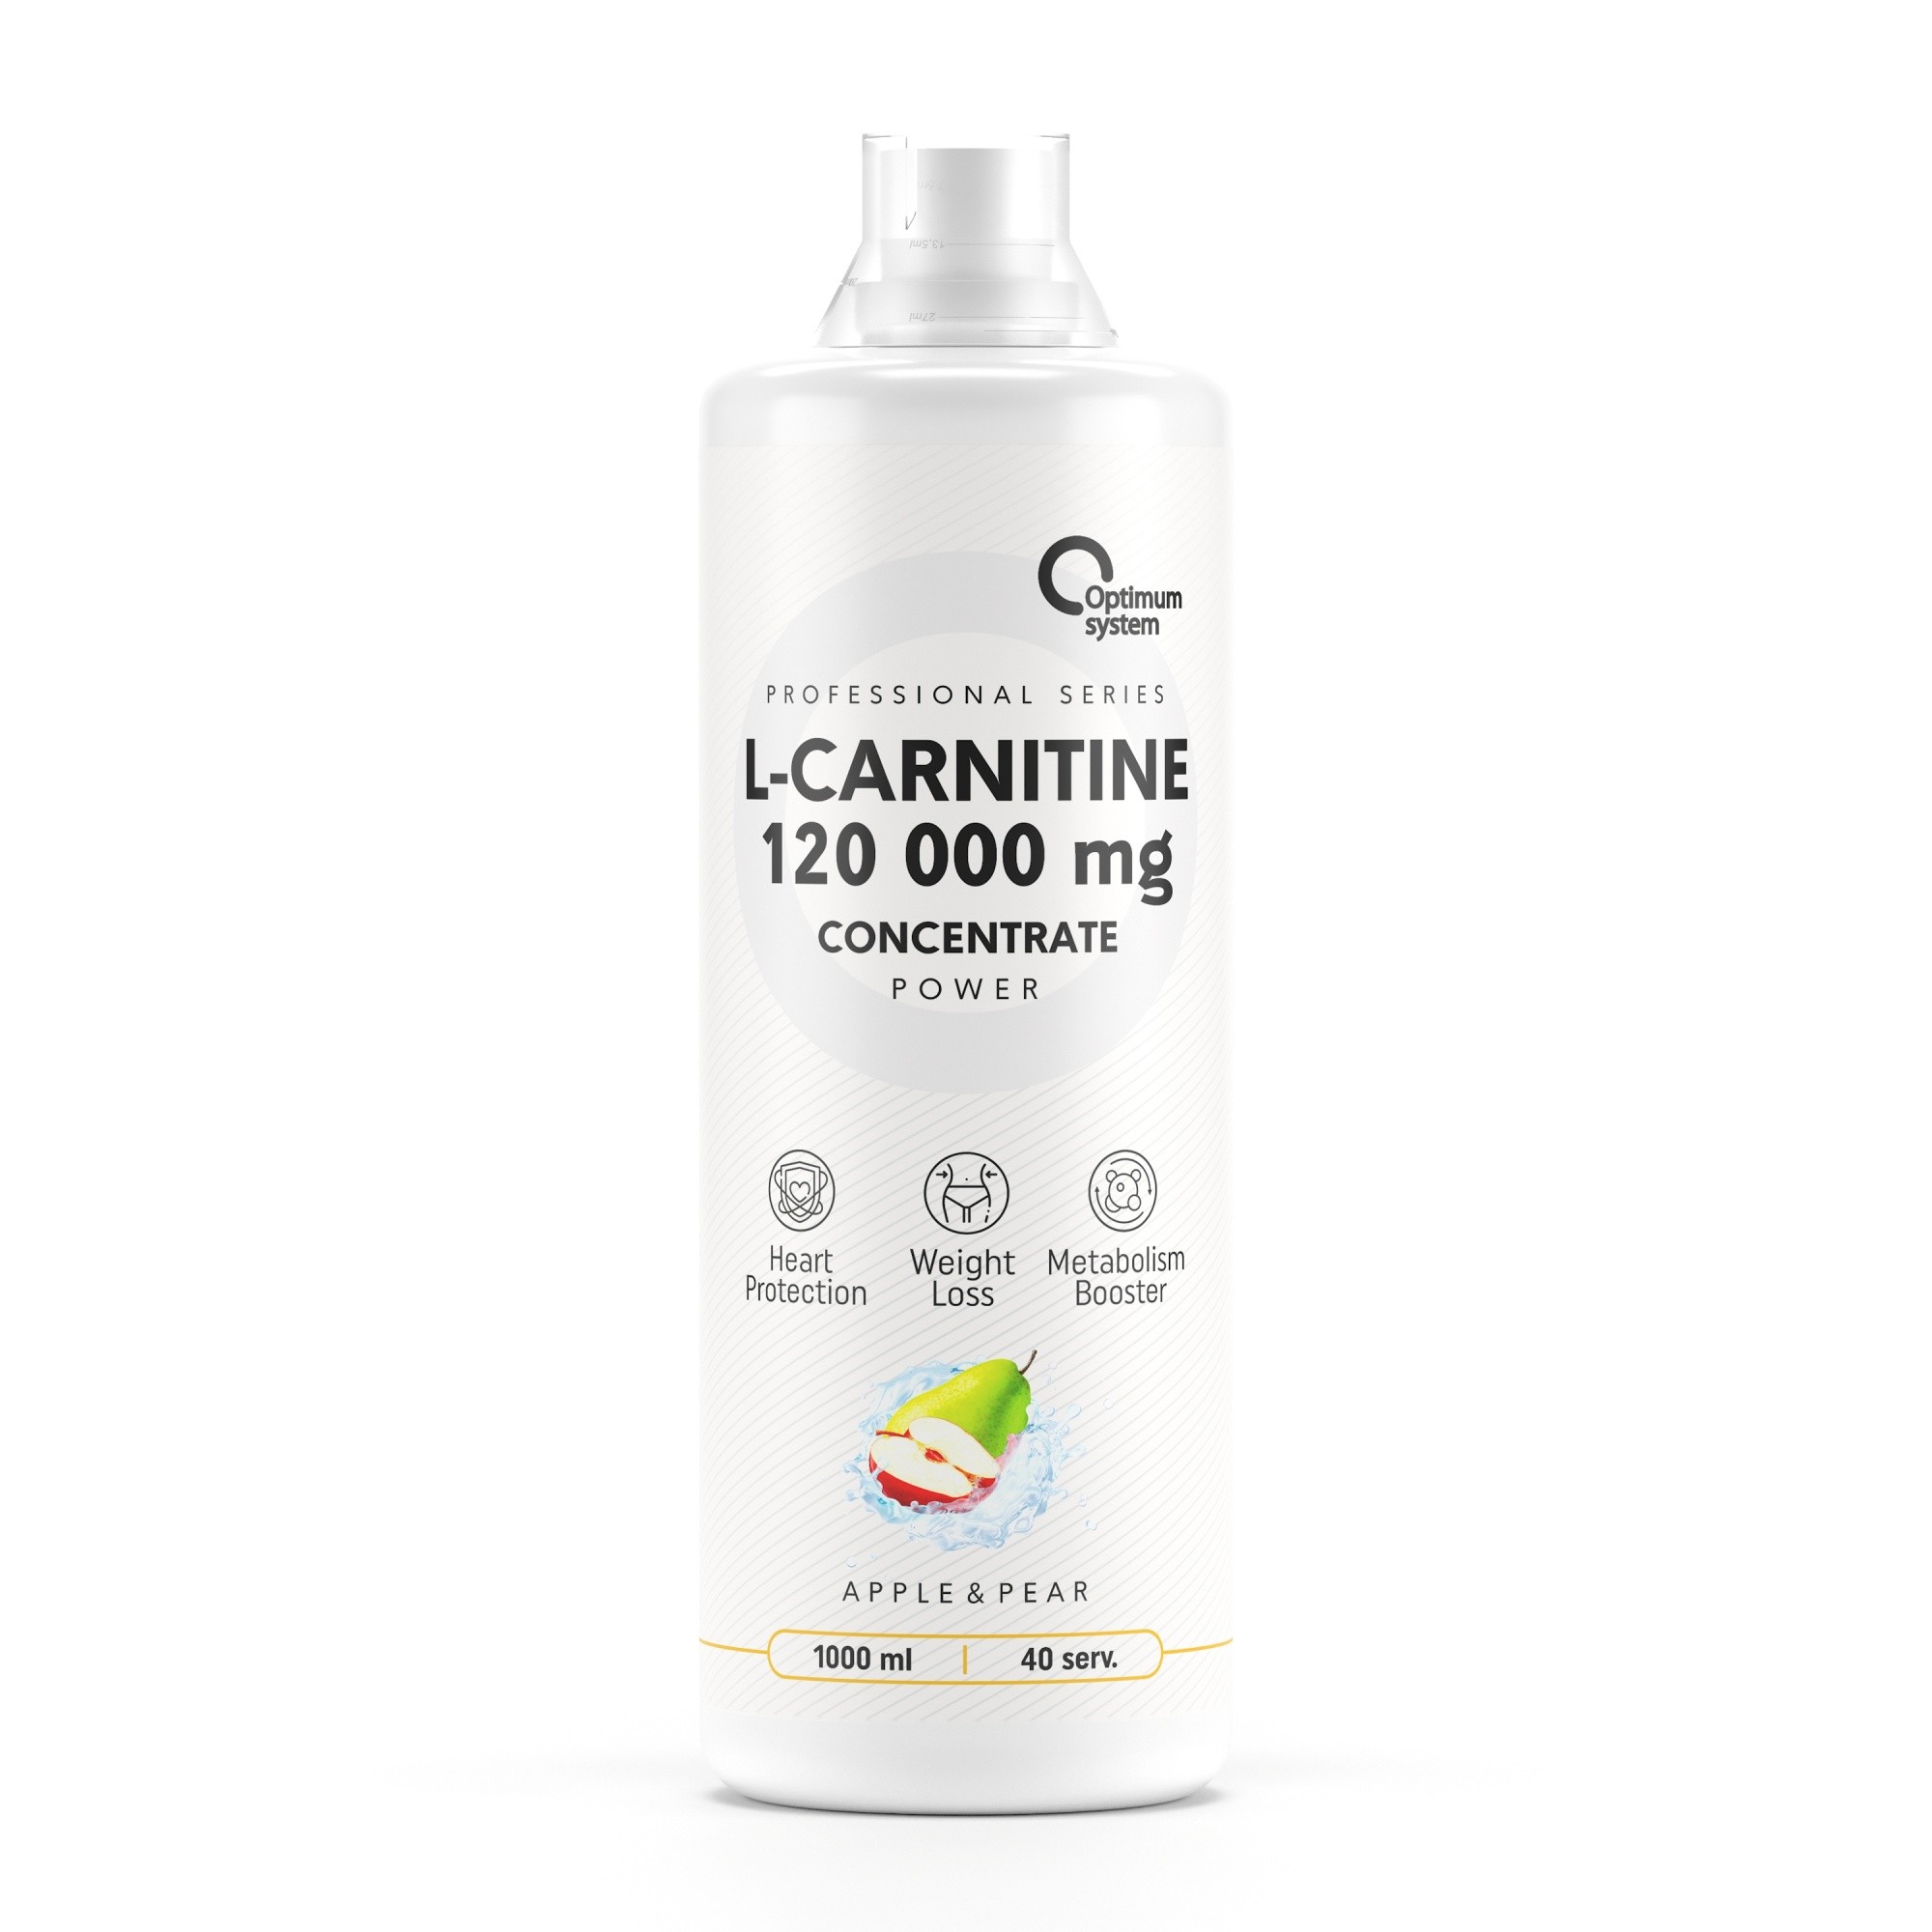 Optimum System L-Carnitine Concentrate 120000 mg POWER, 1000 мл